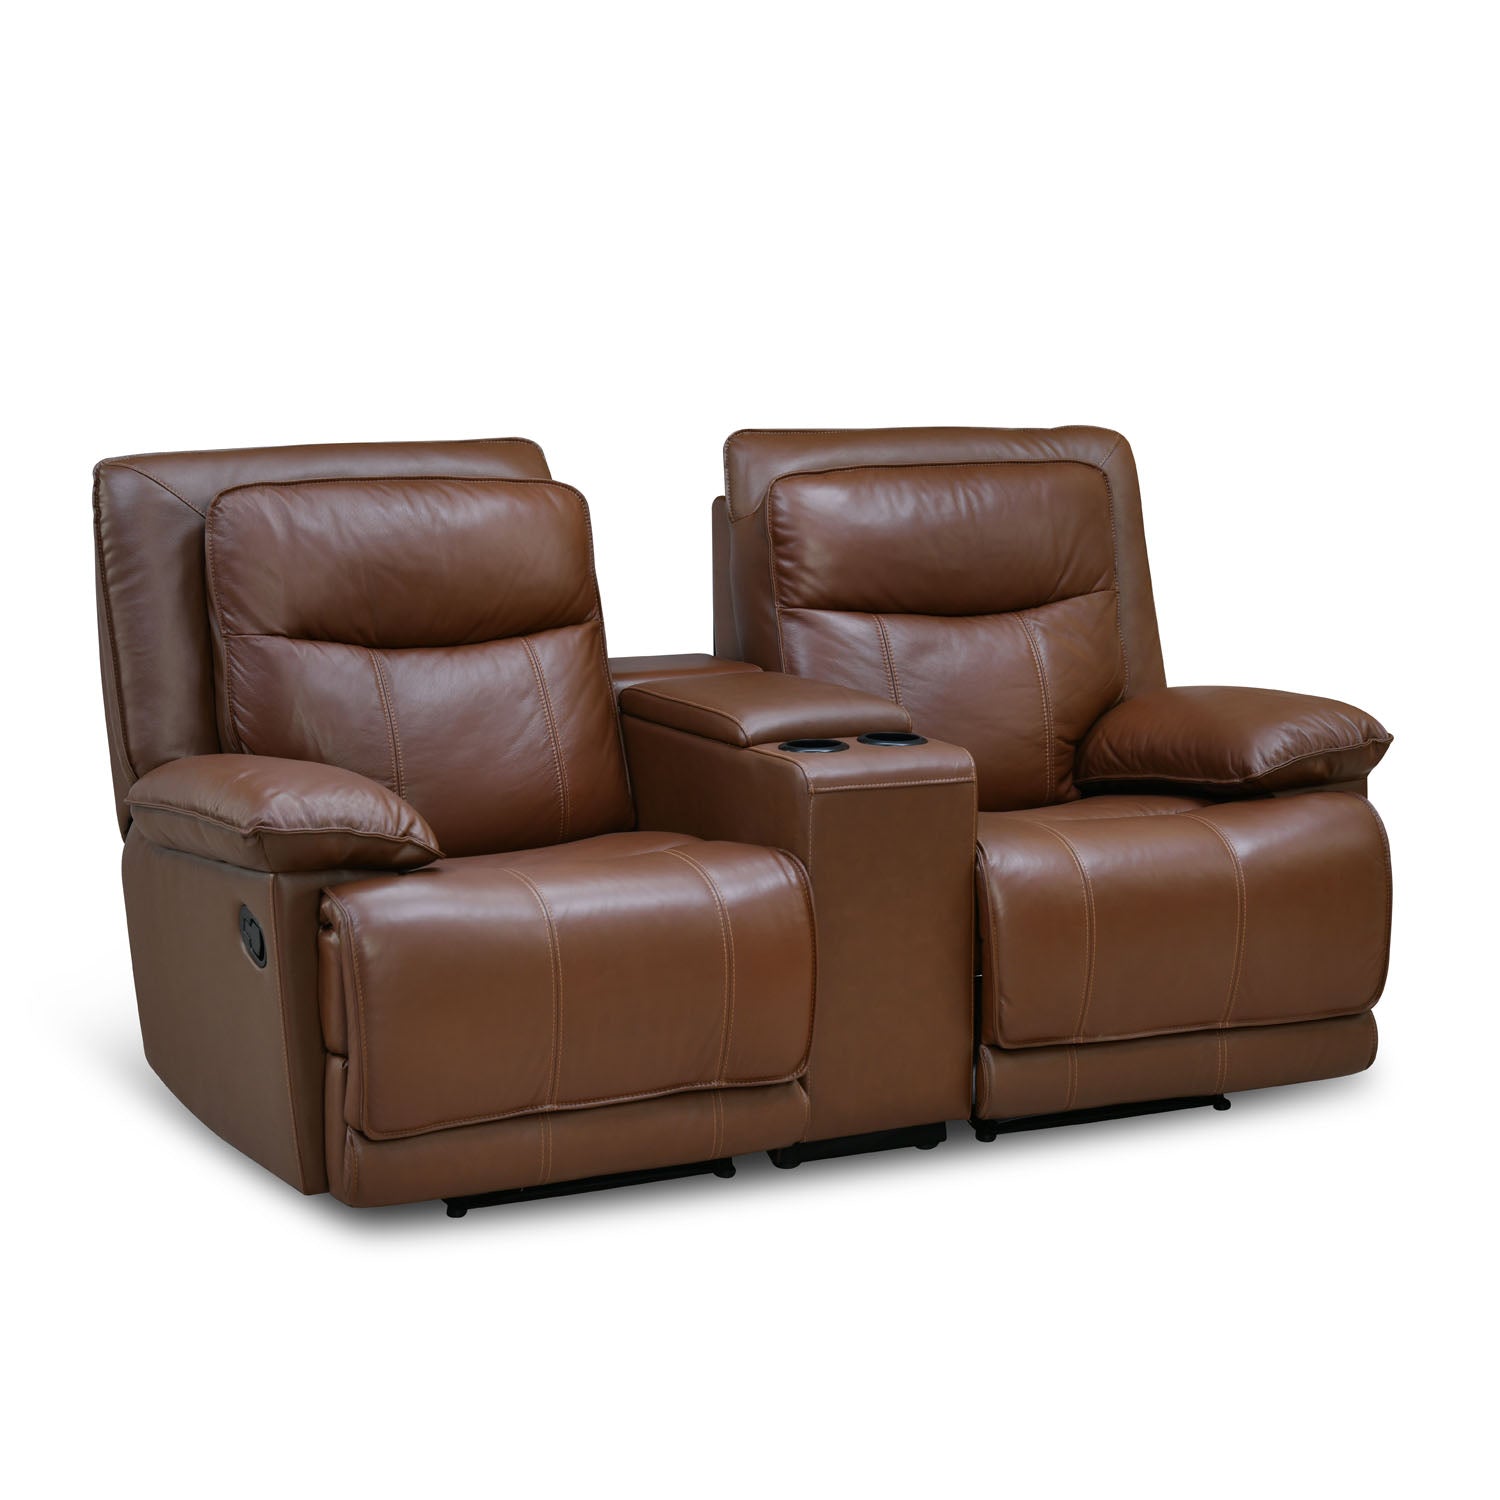 Hayes 2 Seater Leather Manual Recliner with Console (Brown)